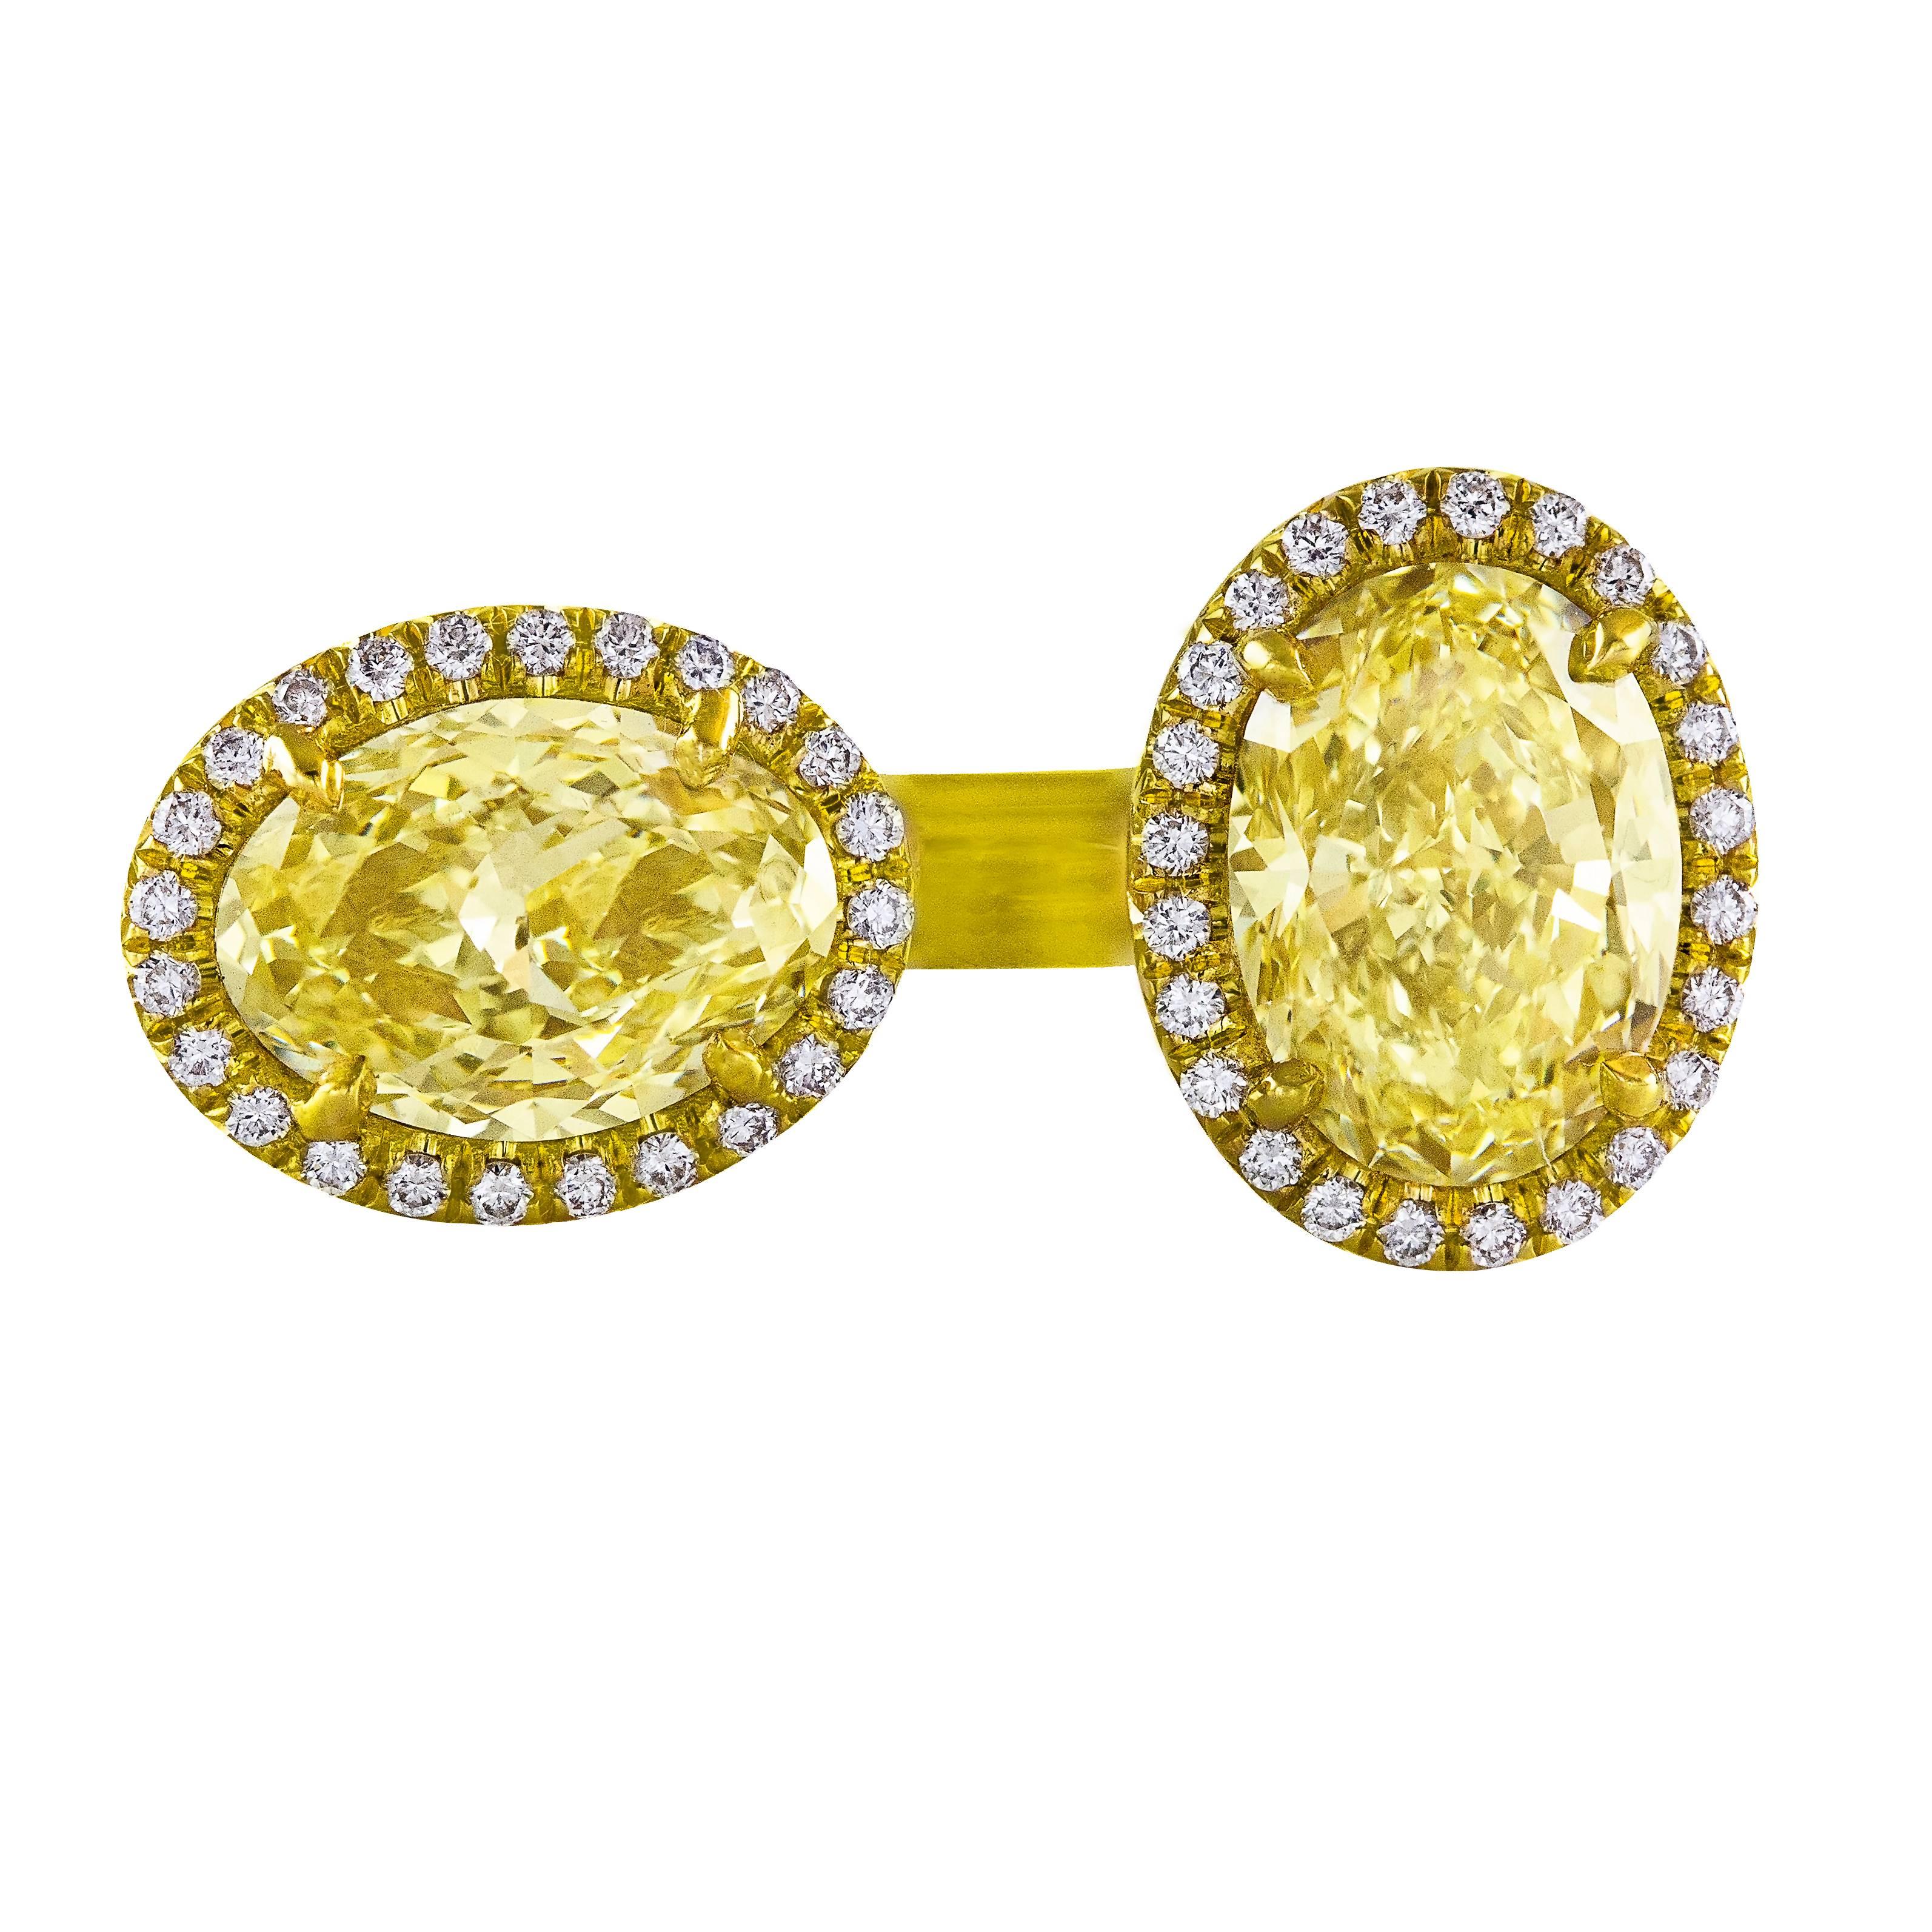 This ring features 2 oval diamonds weighing 2.76 carats total set perpendicular to each other in the open 18K yellow gold mounting. The diamonds are certified by GIA:
1.63 carat Y-Z color and VVS1 clarity GIA # 16243034
1.13 carat Fancy Light Yellow